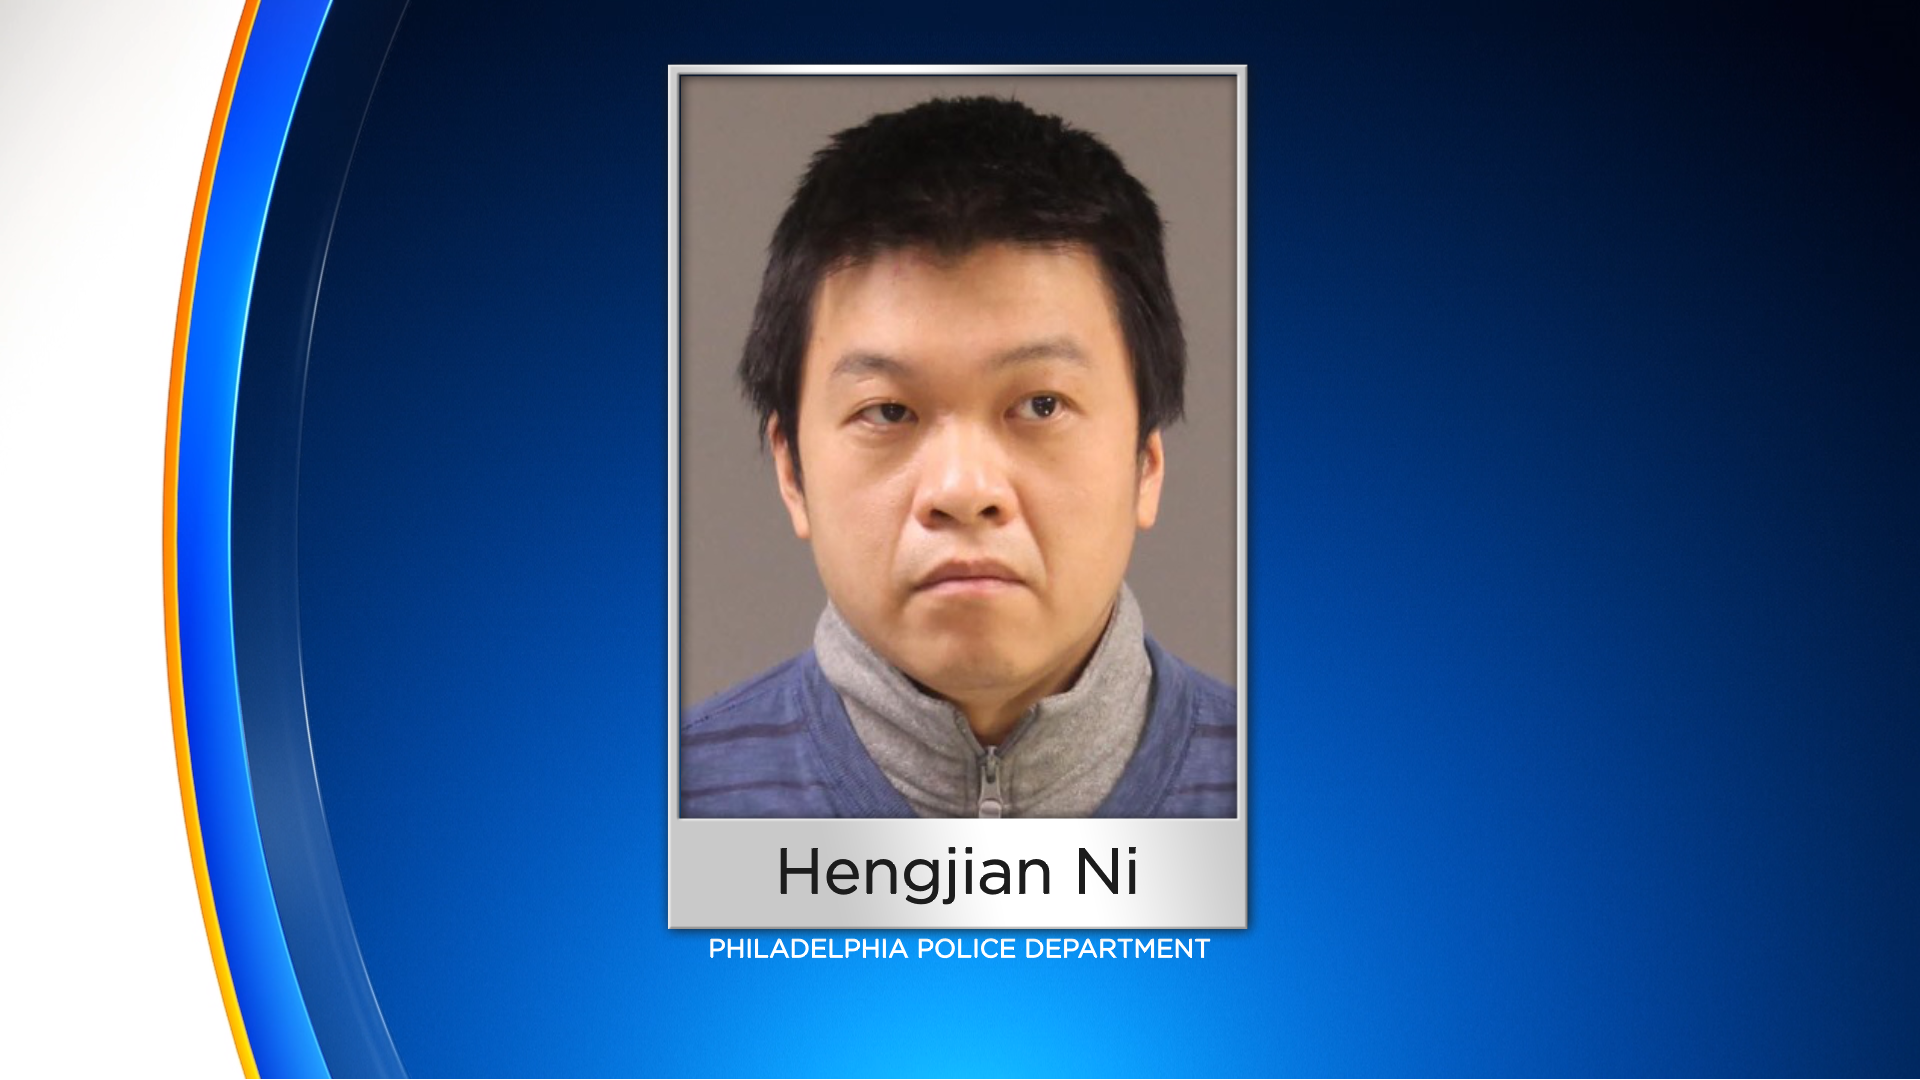 New York Man Hengjian Ni Charged With 3 Counts Of Attempt To Commit Murder For Allegedly Stabbing Mother, 2 Sons In Mayfair: Philadelphia Police